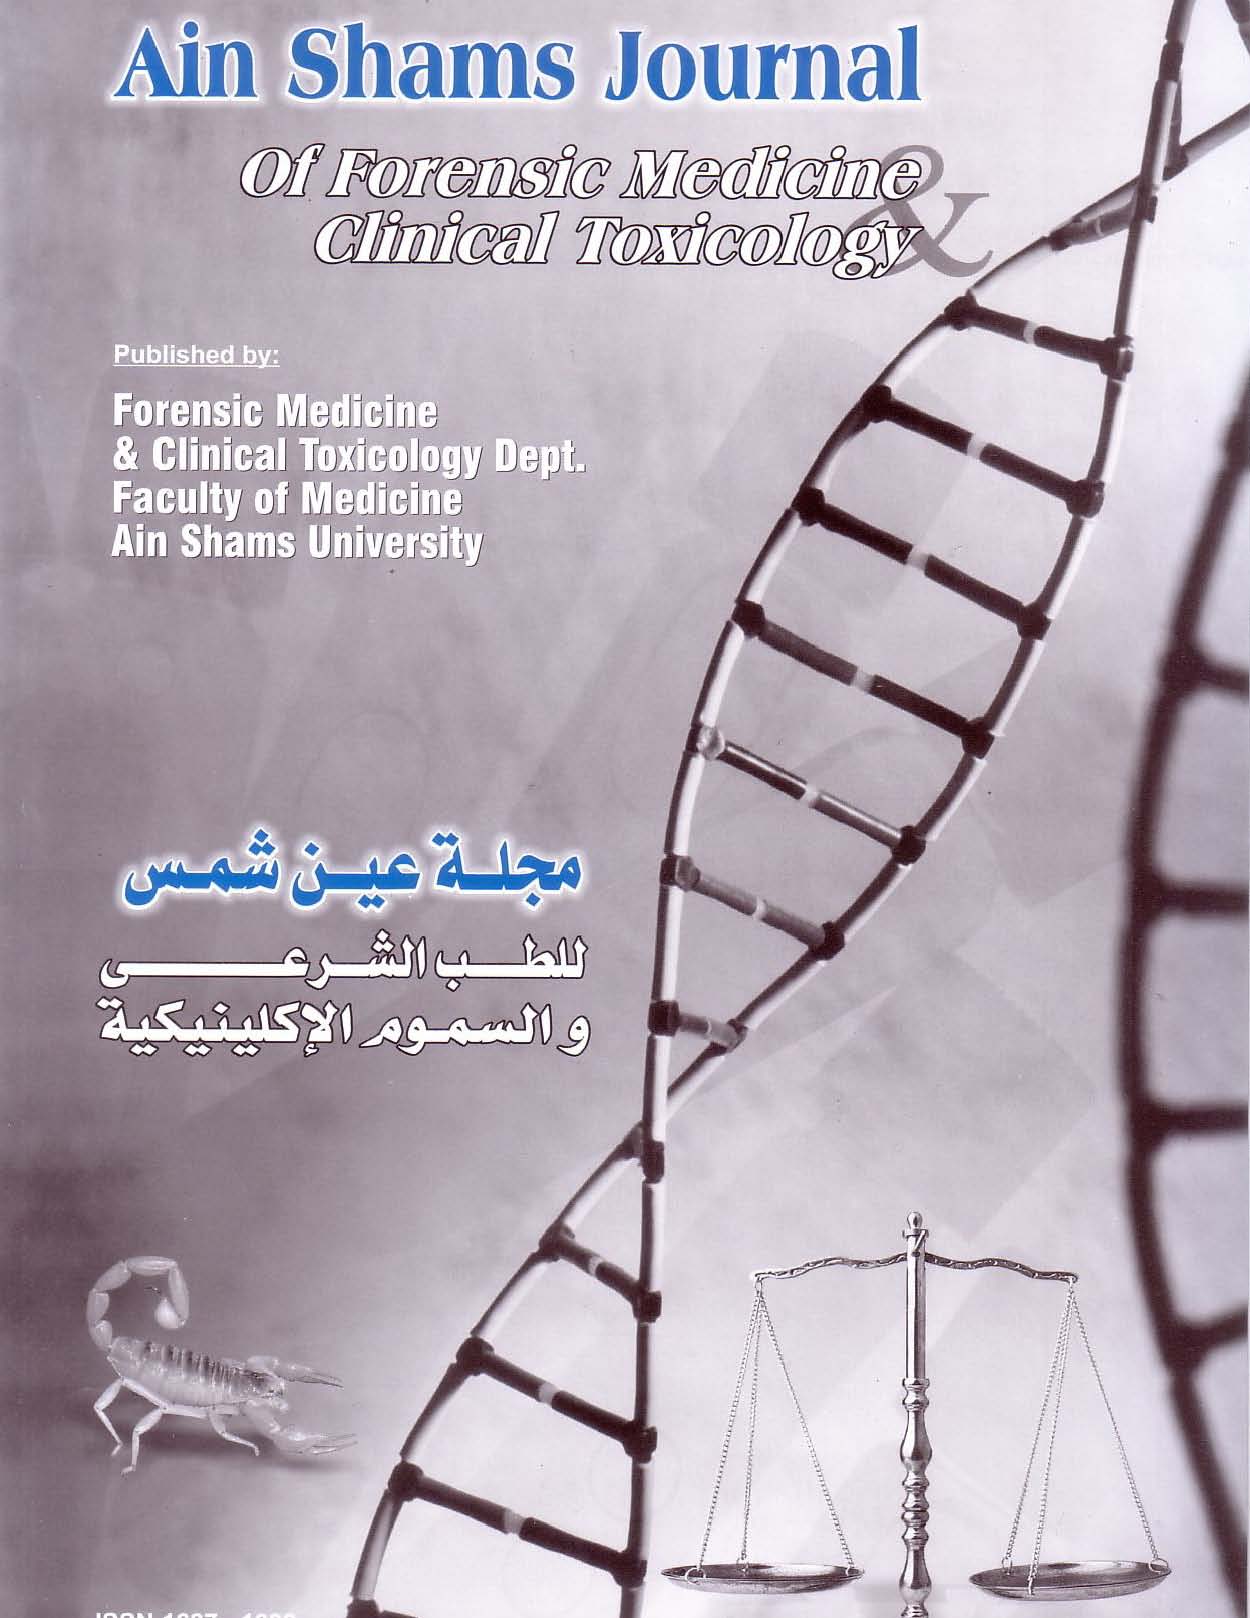 Ain Shams Journal of Forensic Medicine and Clinical Toxicology